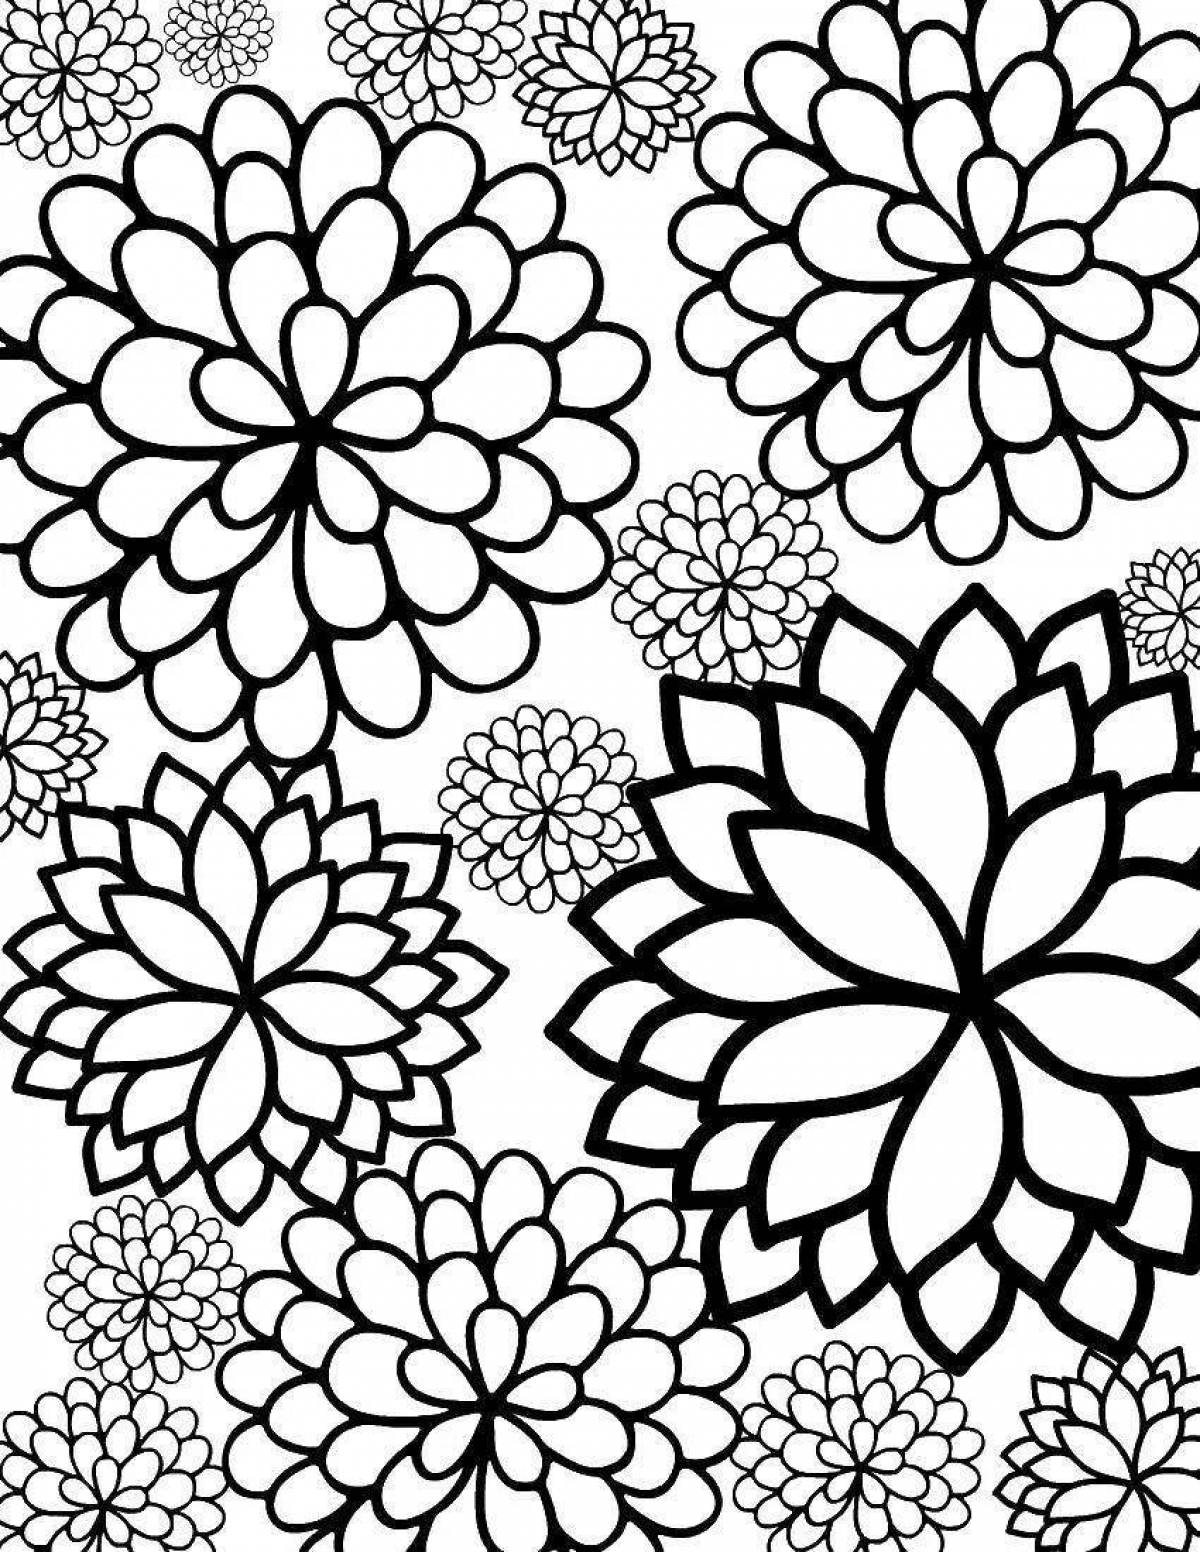 Adorable one color coloring book